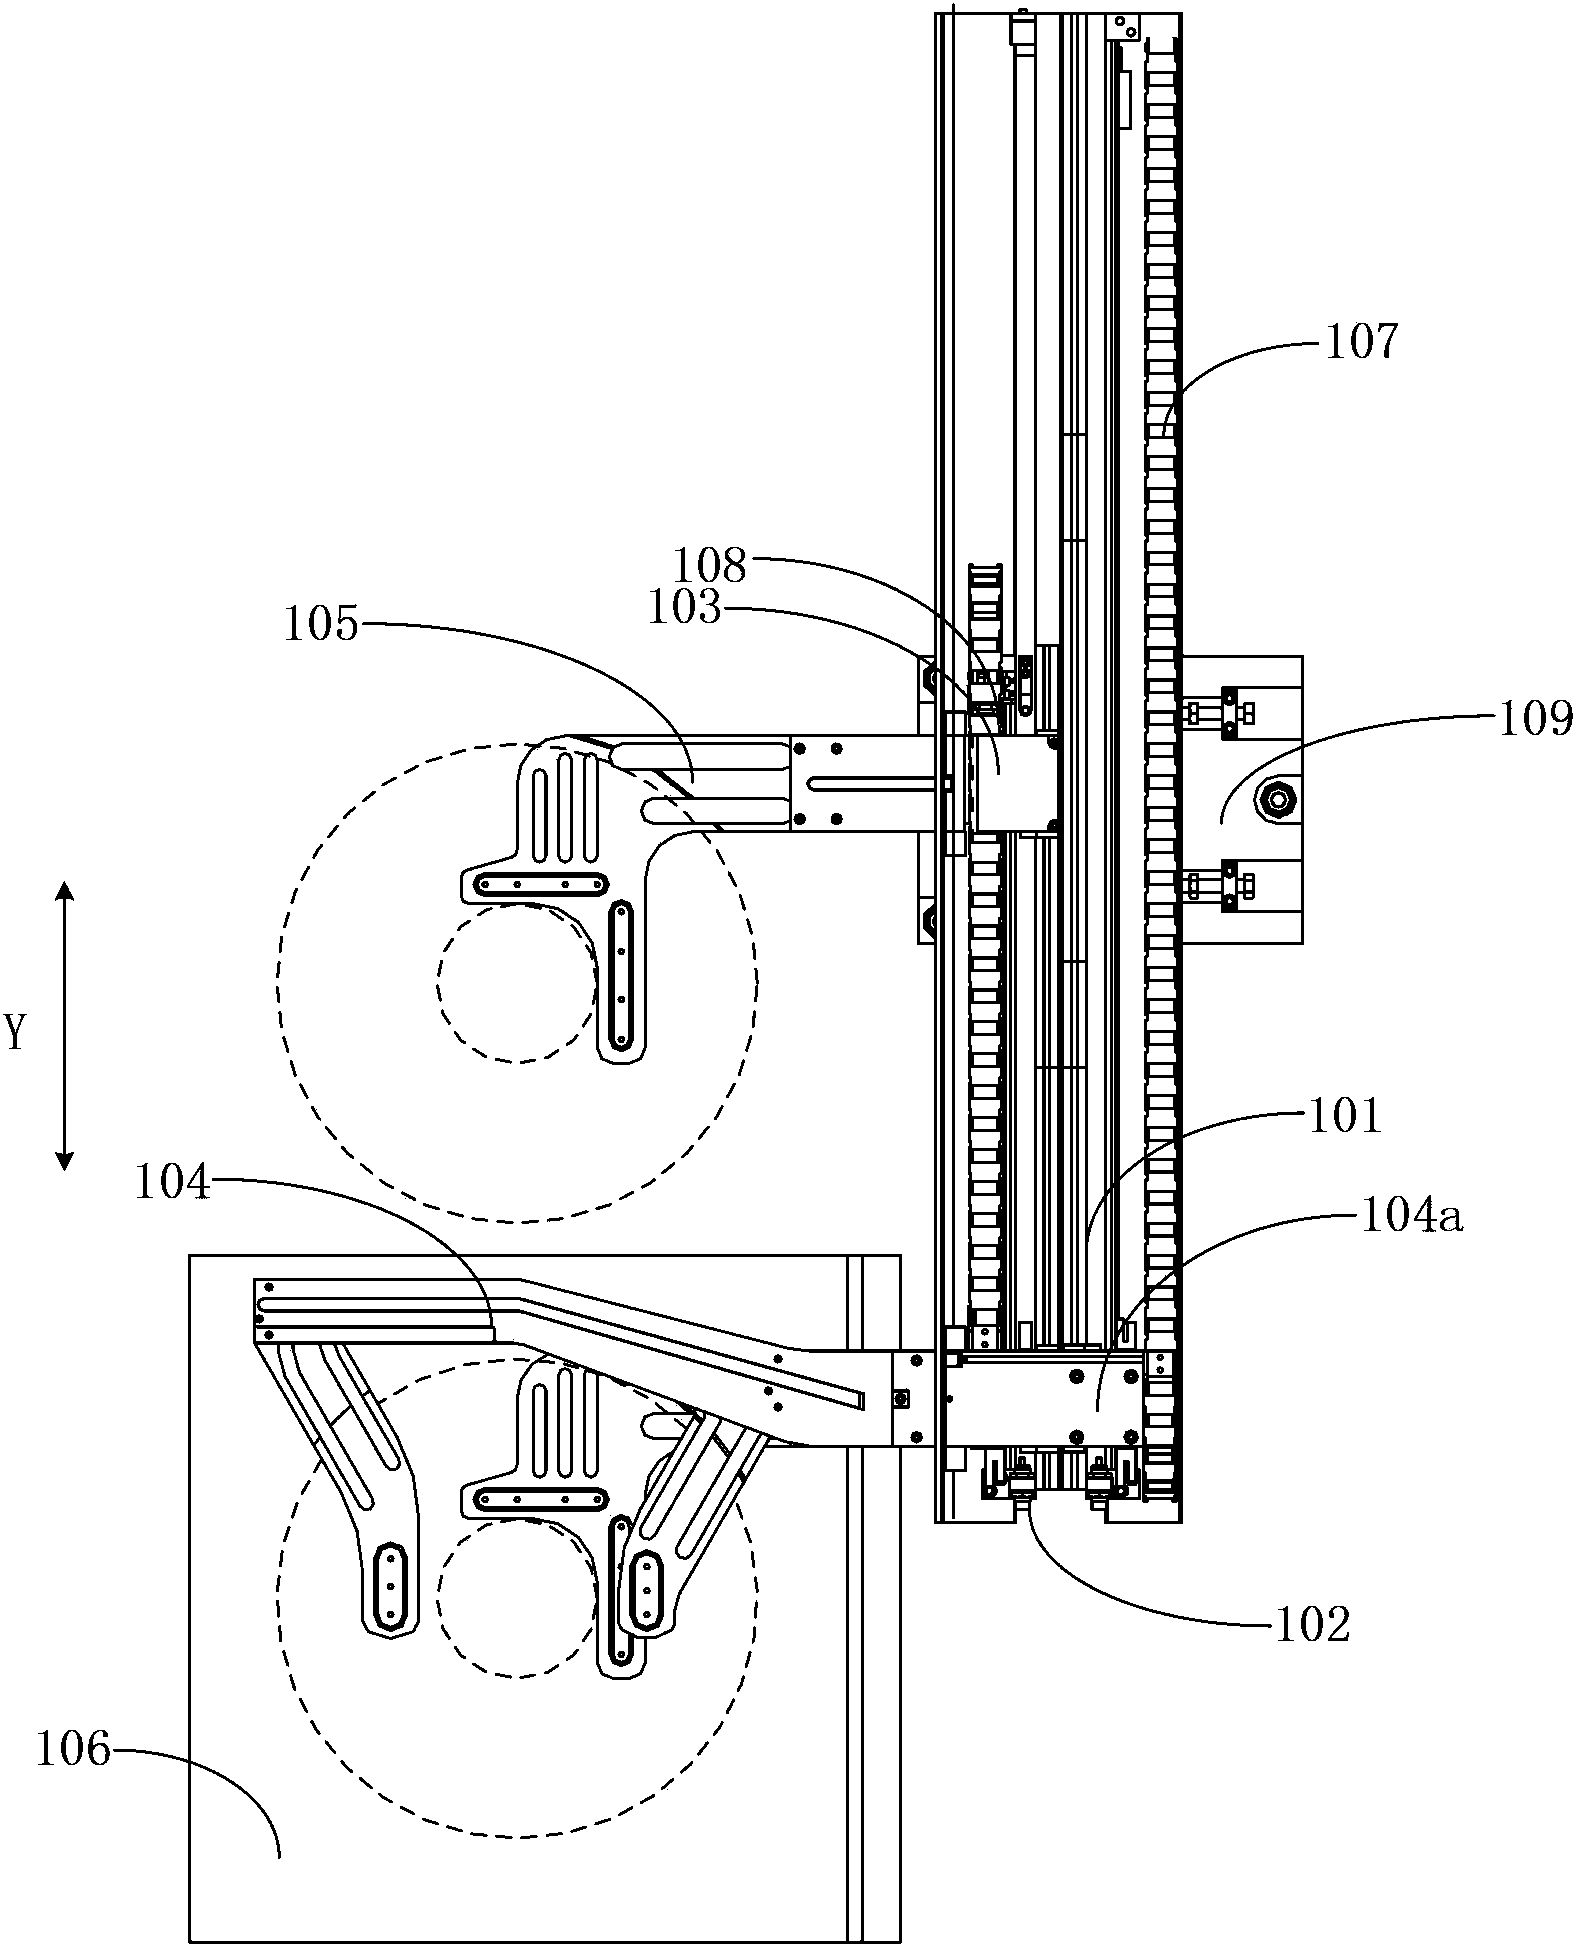 Silicon wafer linear exchange device and method